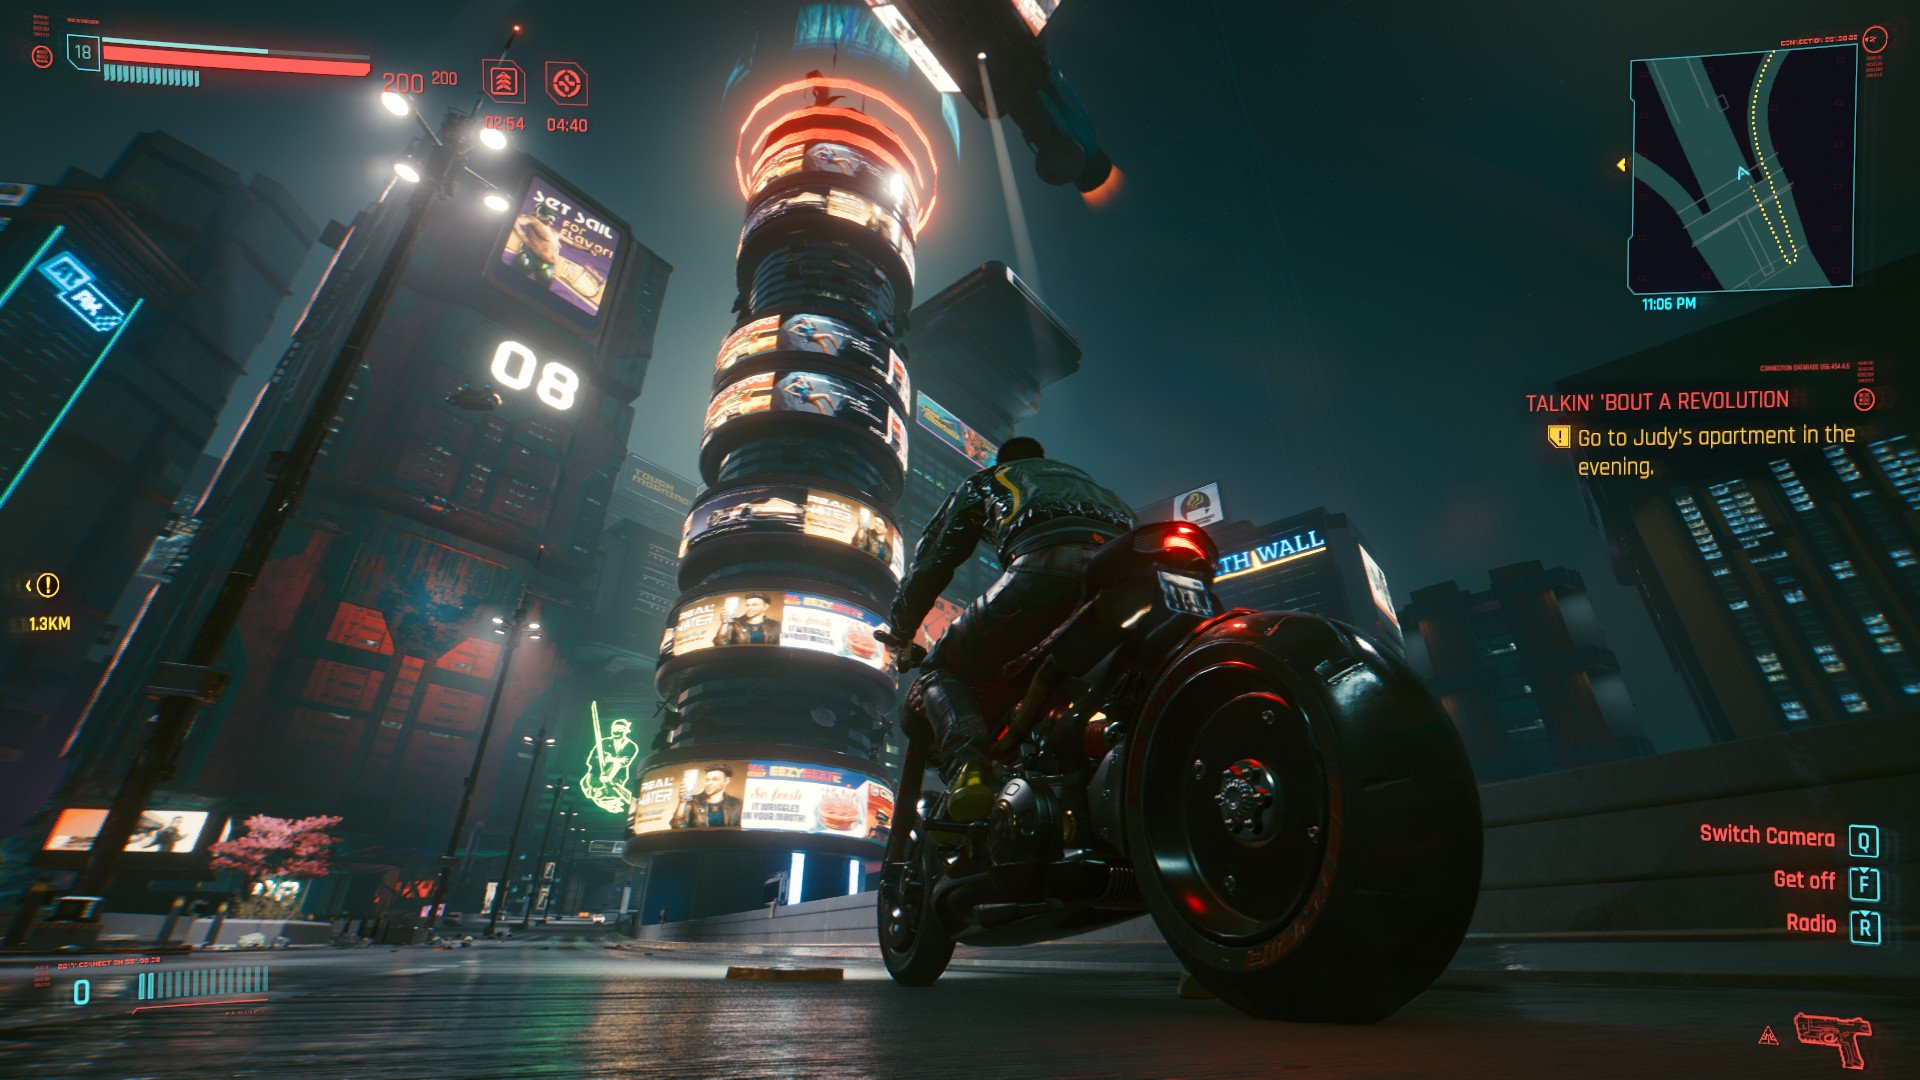 Cyberpunk 2077 PC review Joining industry legend as a contender for